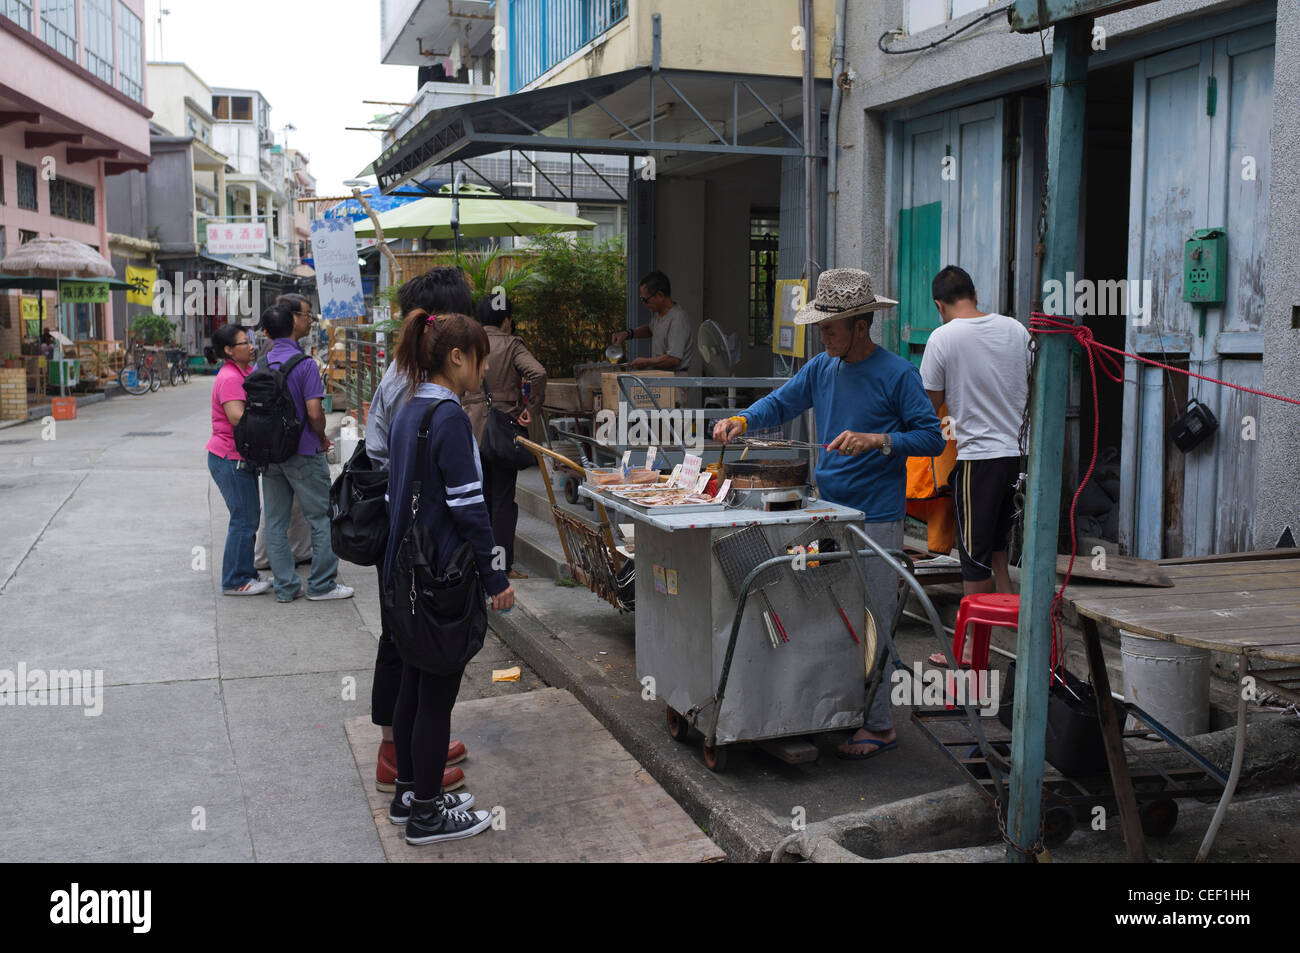 dh Tai O fast food stall LANTAU HONG KONG Chine street vendor boutiques chinois fastfood adolescents asie asiatique Banque D'Images